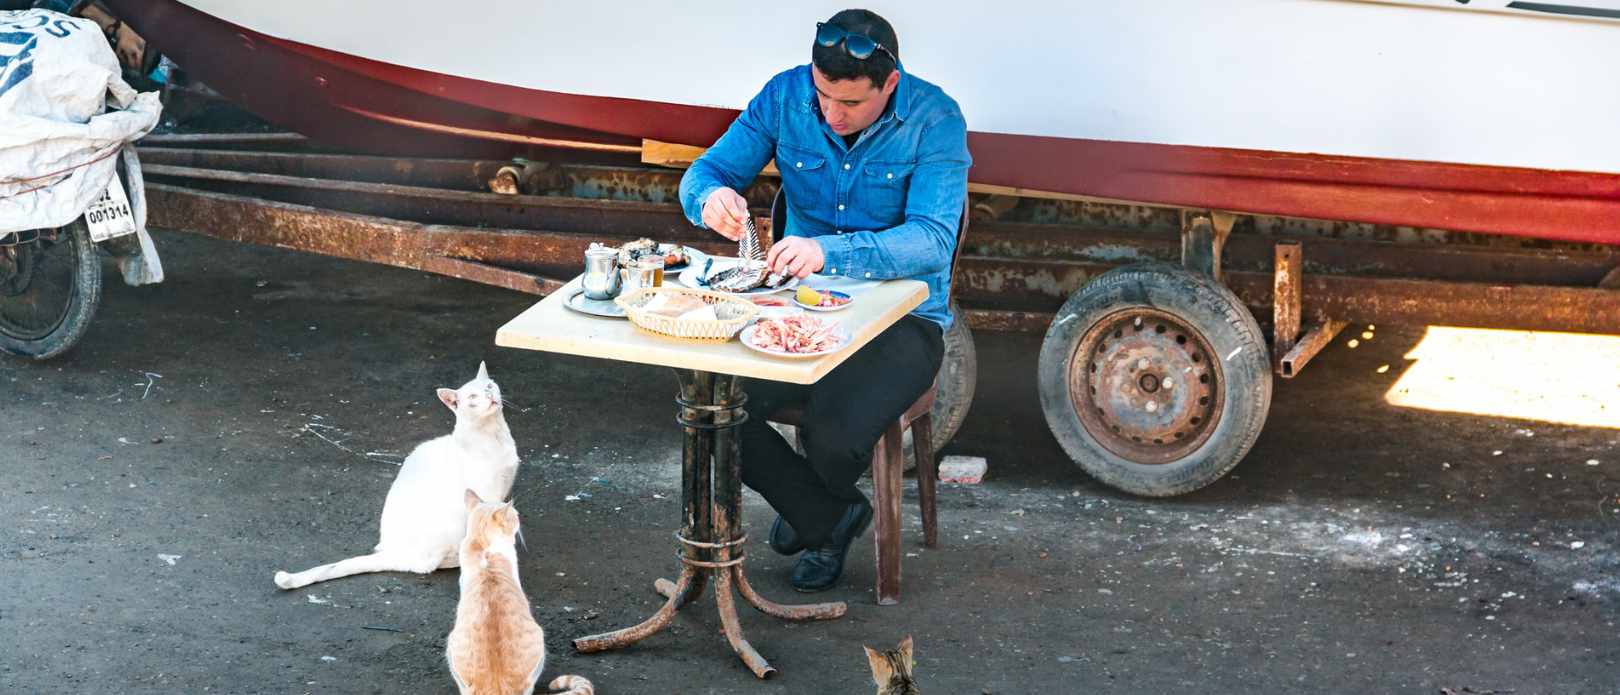 Man in blue jacket eating fish while cats look at him with envy